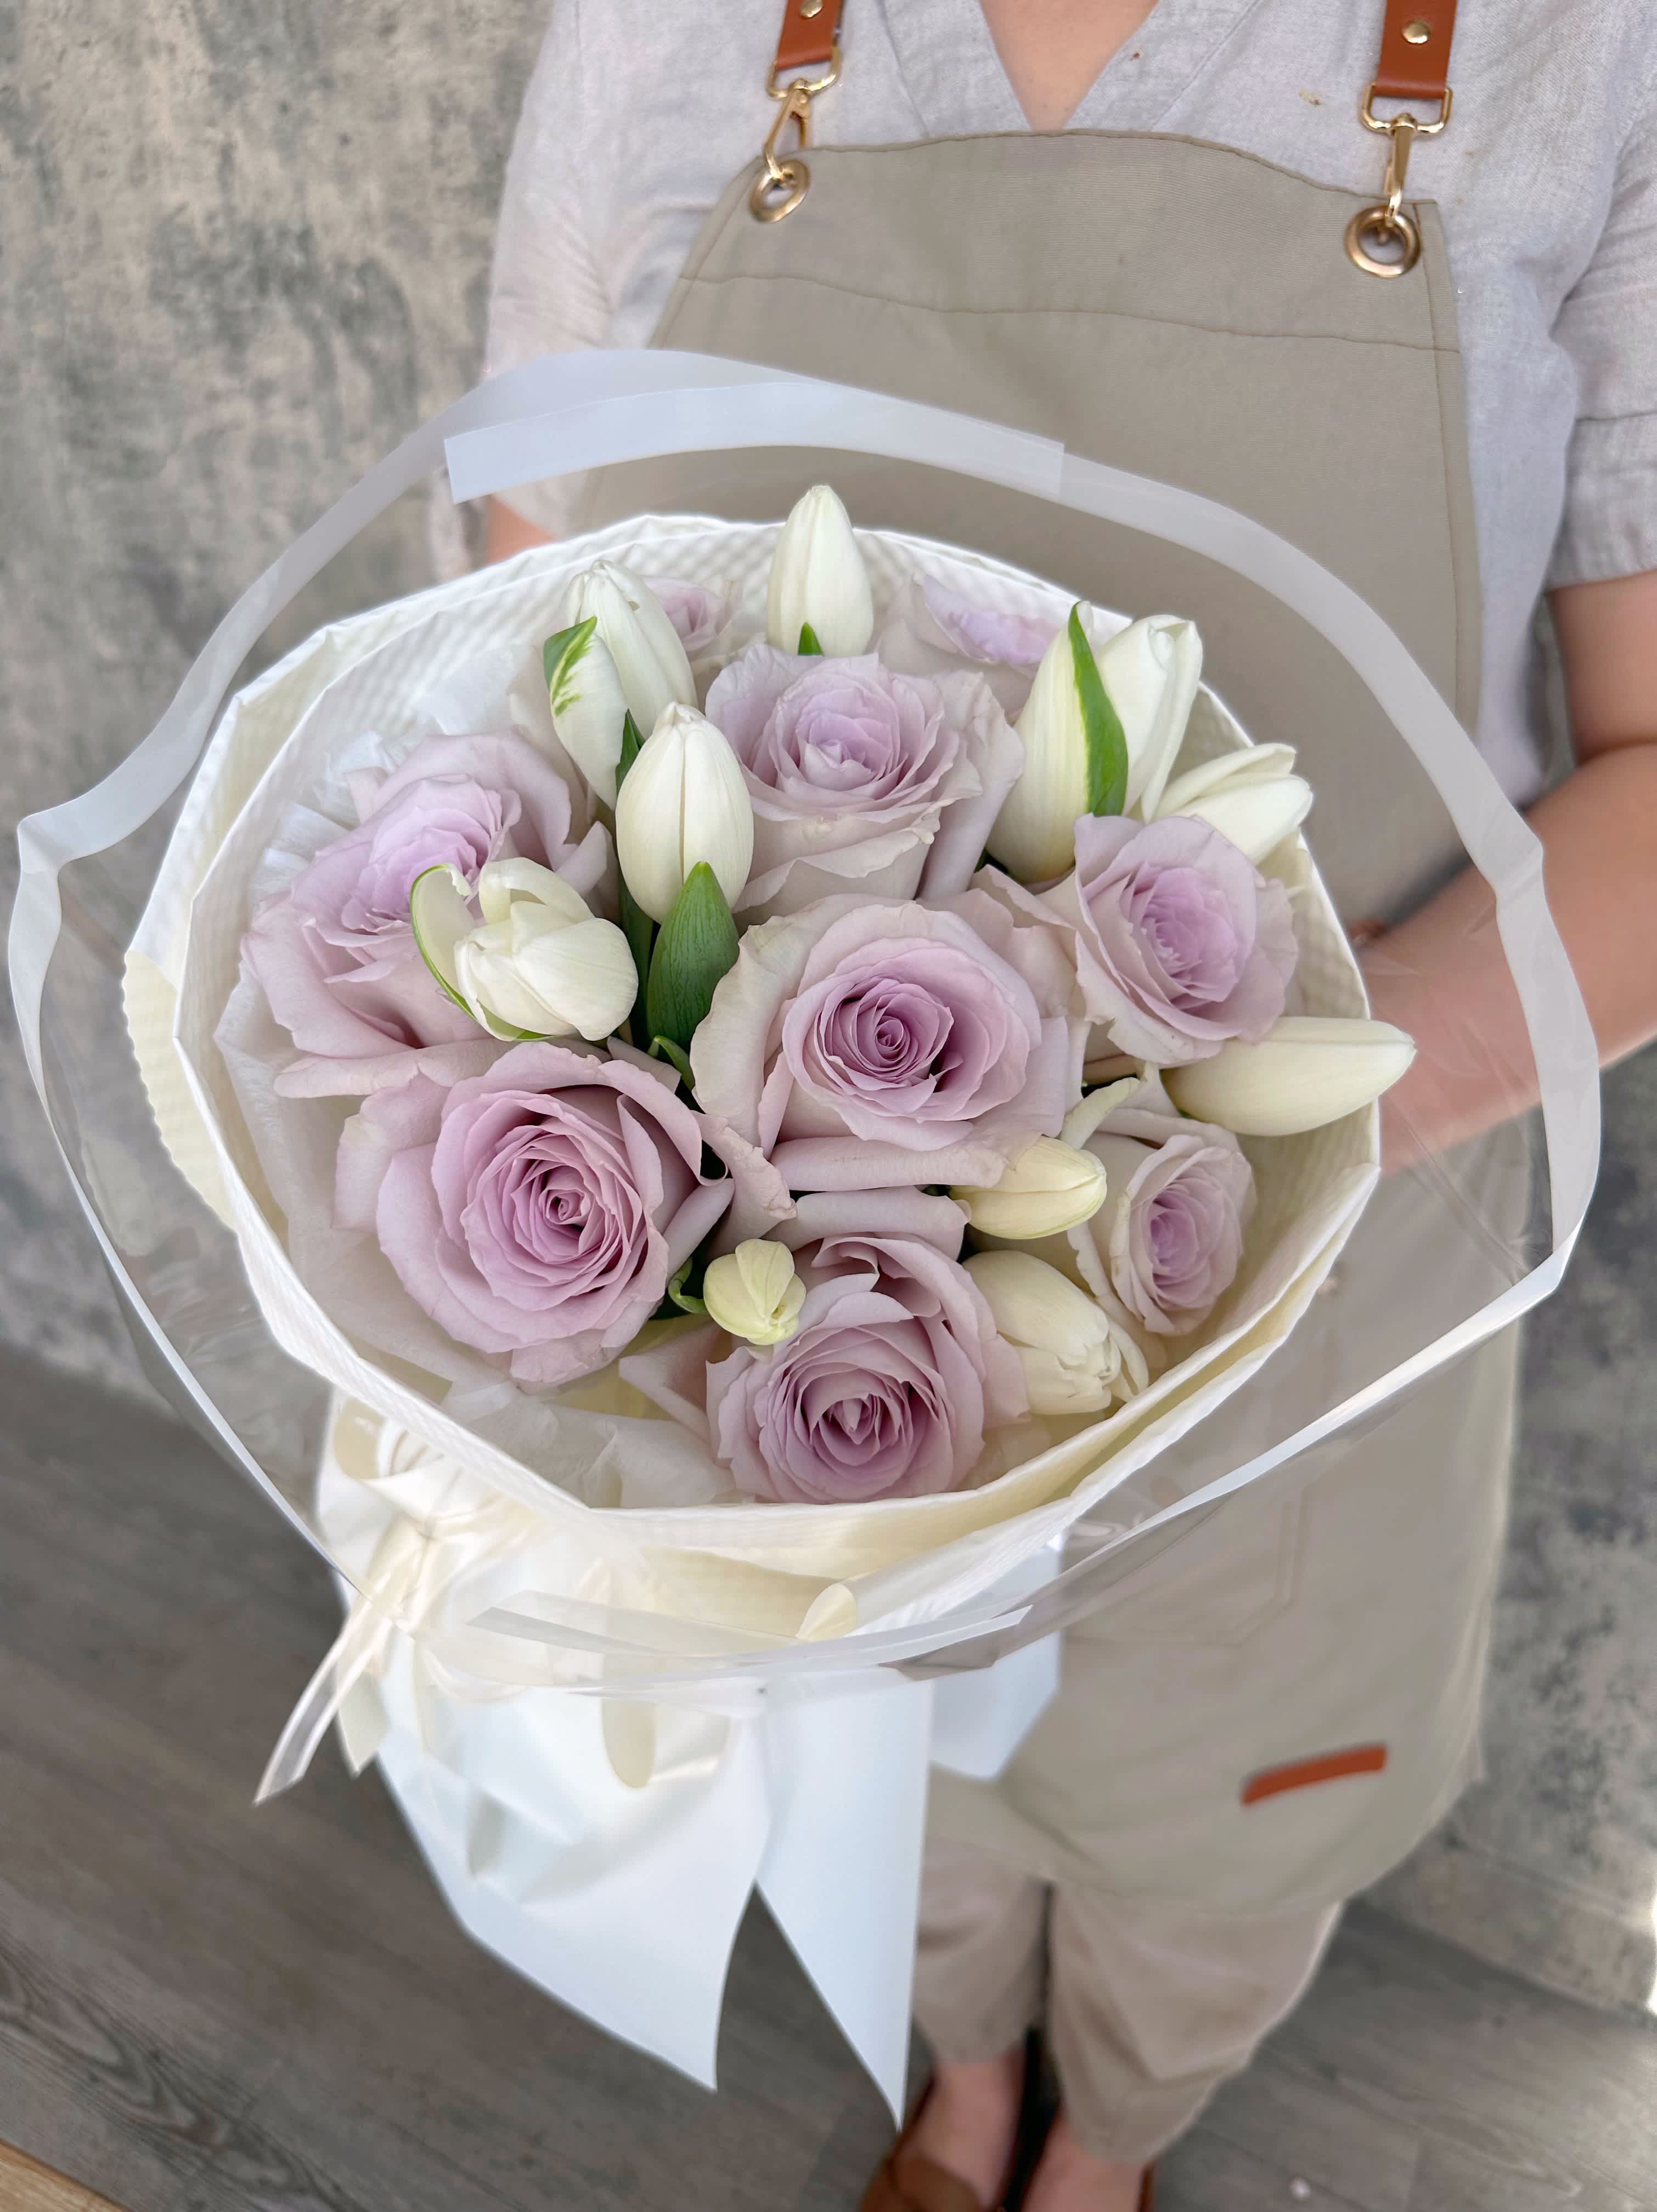 Thank you Mom - 9 Andrea long stem roses in dusty lavender color mix with pure white tulips make so gently cute bouquet wrap. Size 11”x 17”.  Deluxe will be 1 &amp;1/2 Dz long stem roses mix with tulips.